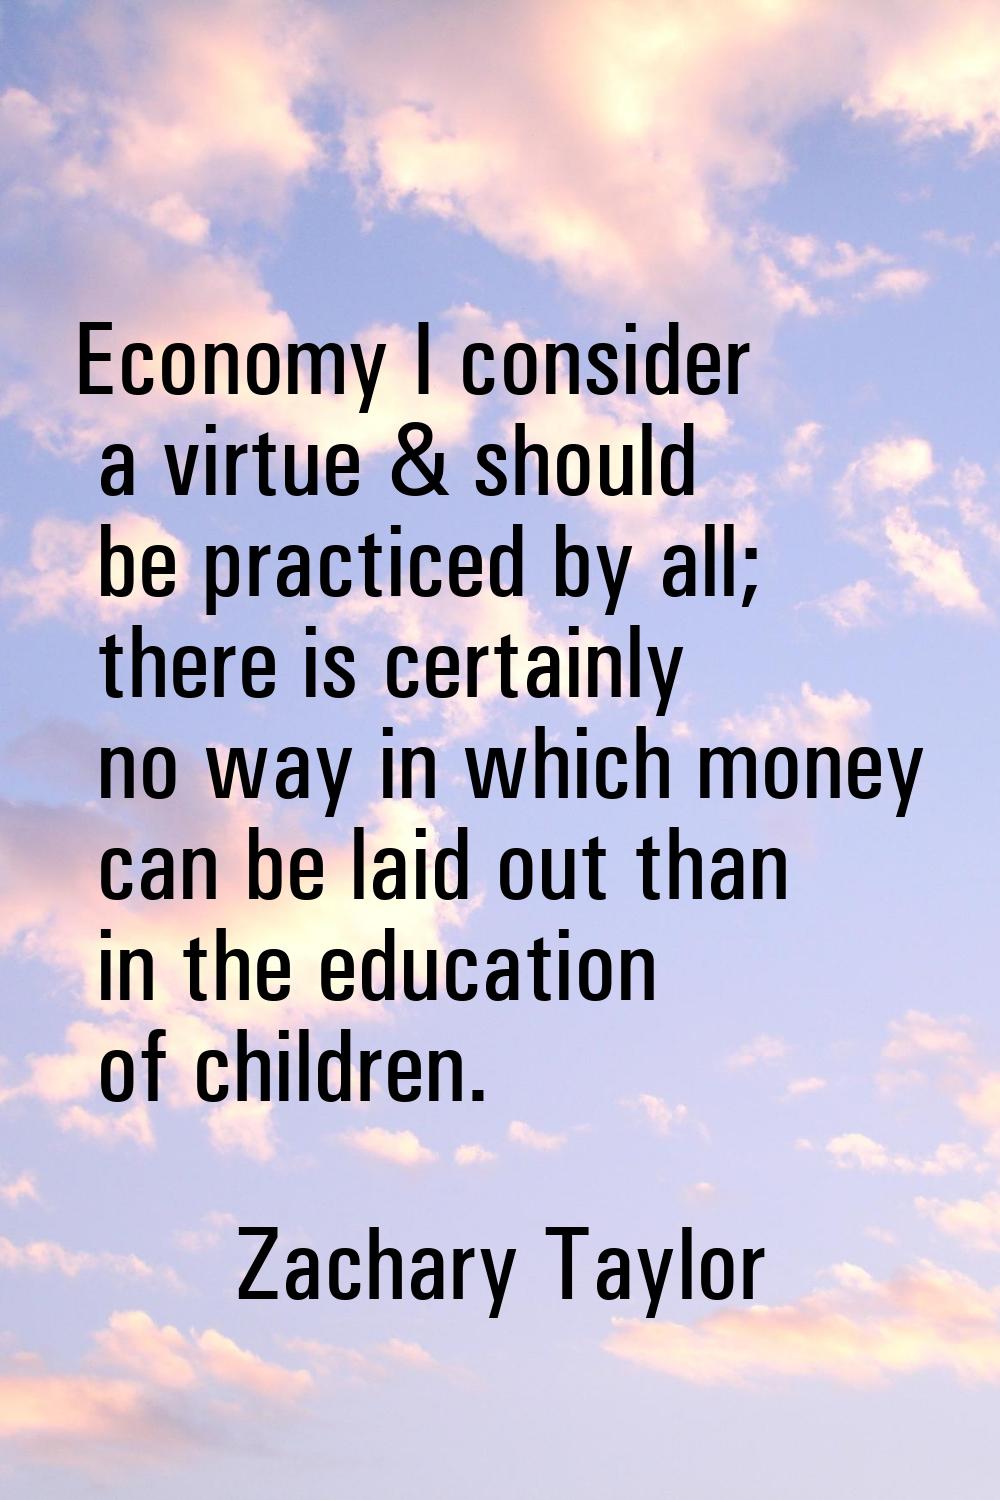 Economy I consider a virtue & should be practiced by all; there is certainly no way in which money 